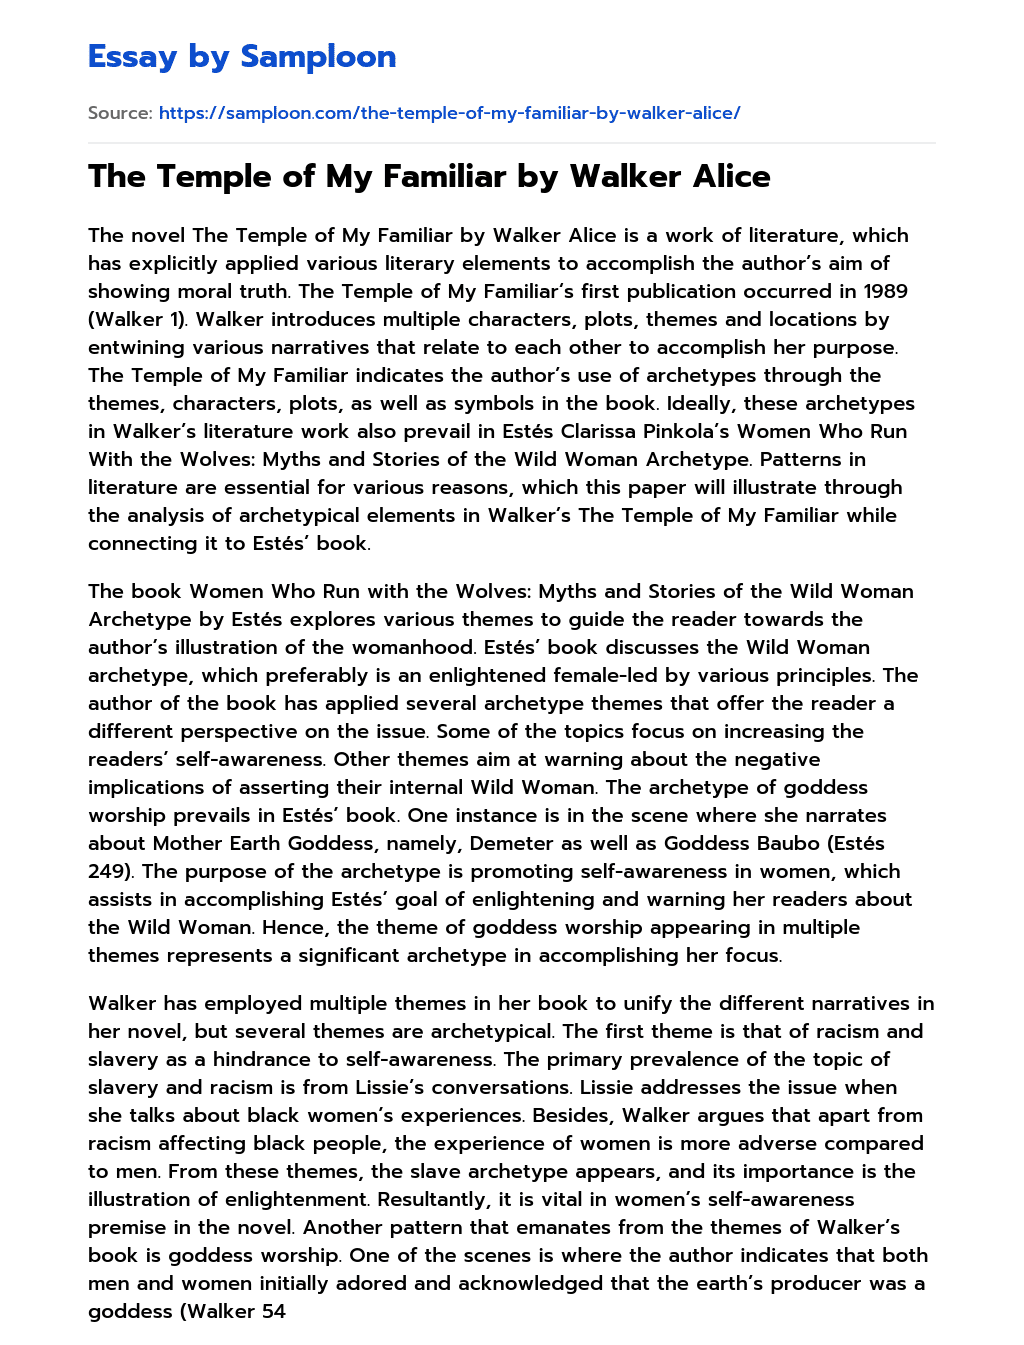 The Temple of My Familiar by Walker Alice essay